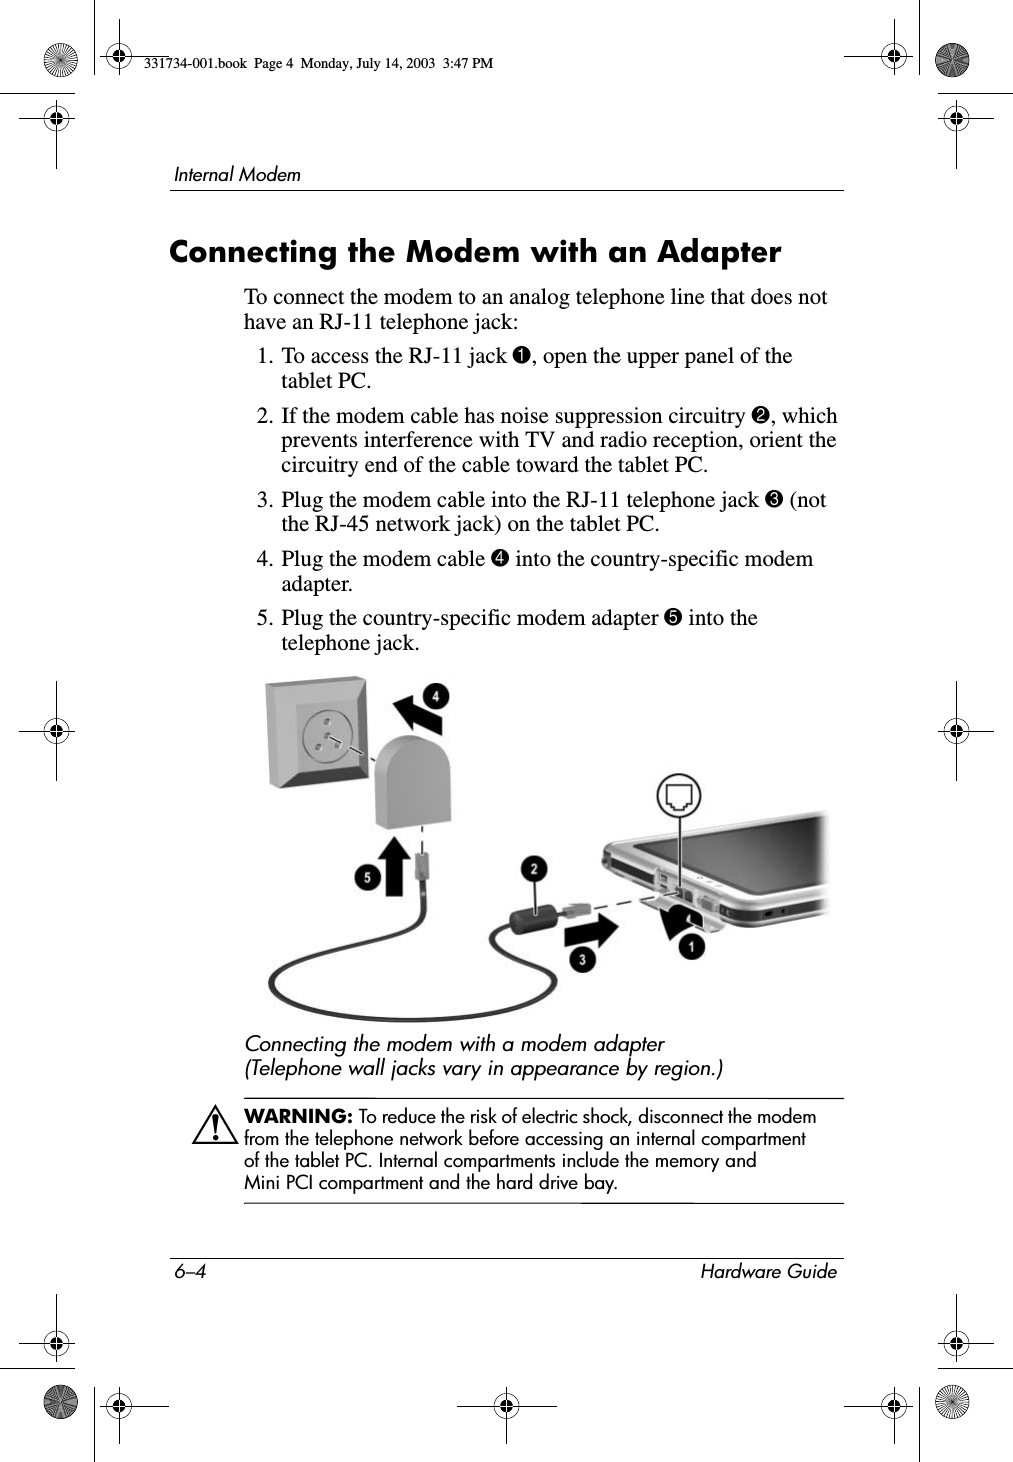 6–4 Hardware GuideInternal ModemConnecting the Modem with an AdapterTo connect the modem to an analog telephone line that does not have an RJ-11 telephone jack:1. To access the RJ-11 jack 1, open the upper panel of the tablet PC.2. If the modem cable has noise suppression circuitry 2, which prevents interference with TV and radio reception, orient the circuitry end of the cable toward the tablet PC.3. Plug the modem cable into the RJ-11 telephone jack 3 (not the RJ-45 network jack) on the tablet PC.4. Plug the modem cable 4 into the country-specific modem adapter.5. Plug the country-specific modem adapter 5 into the telephone jack.Connecting the modem with a modem adapter (Telephone wall jacks vary in appearance by region.)ÅWARNING: To reduce the risk of electric shock, disconnect the modem from the telephone network before accessing an internal compartment of the tablet PC. Internal compartments include the memory and Mini PCI compartment and the hard drive bay.331734-001.book  Page 4  Monday, July 14, 2003  3:47 PM